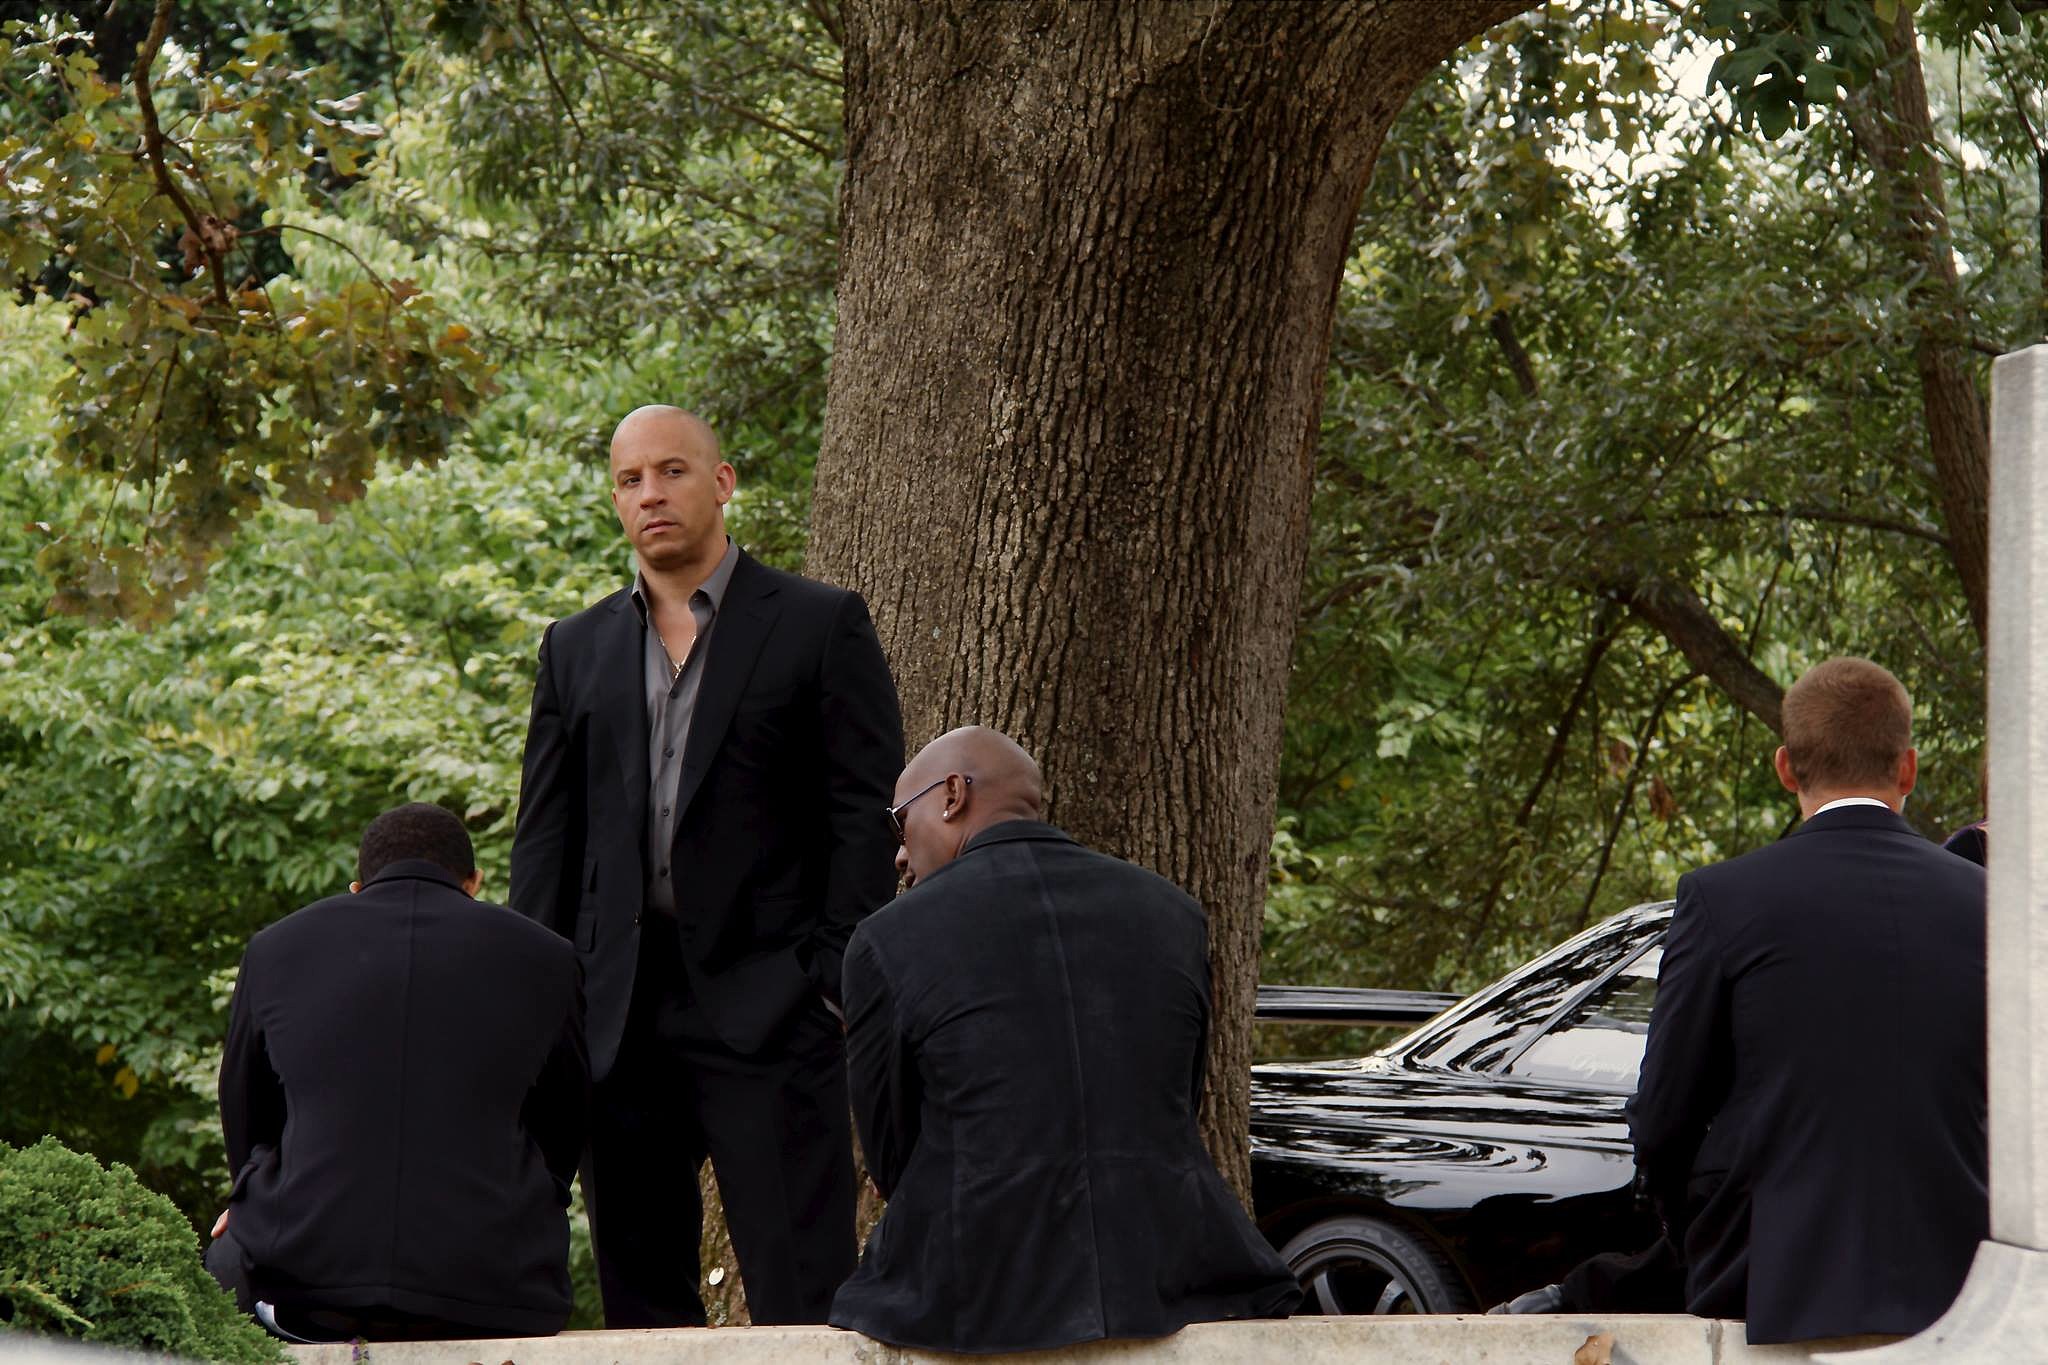 Fast and Furious 7′: Vin Diesel Teases a Funeral Scene in New Image